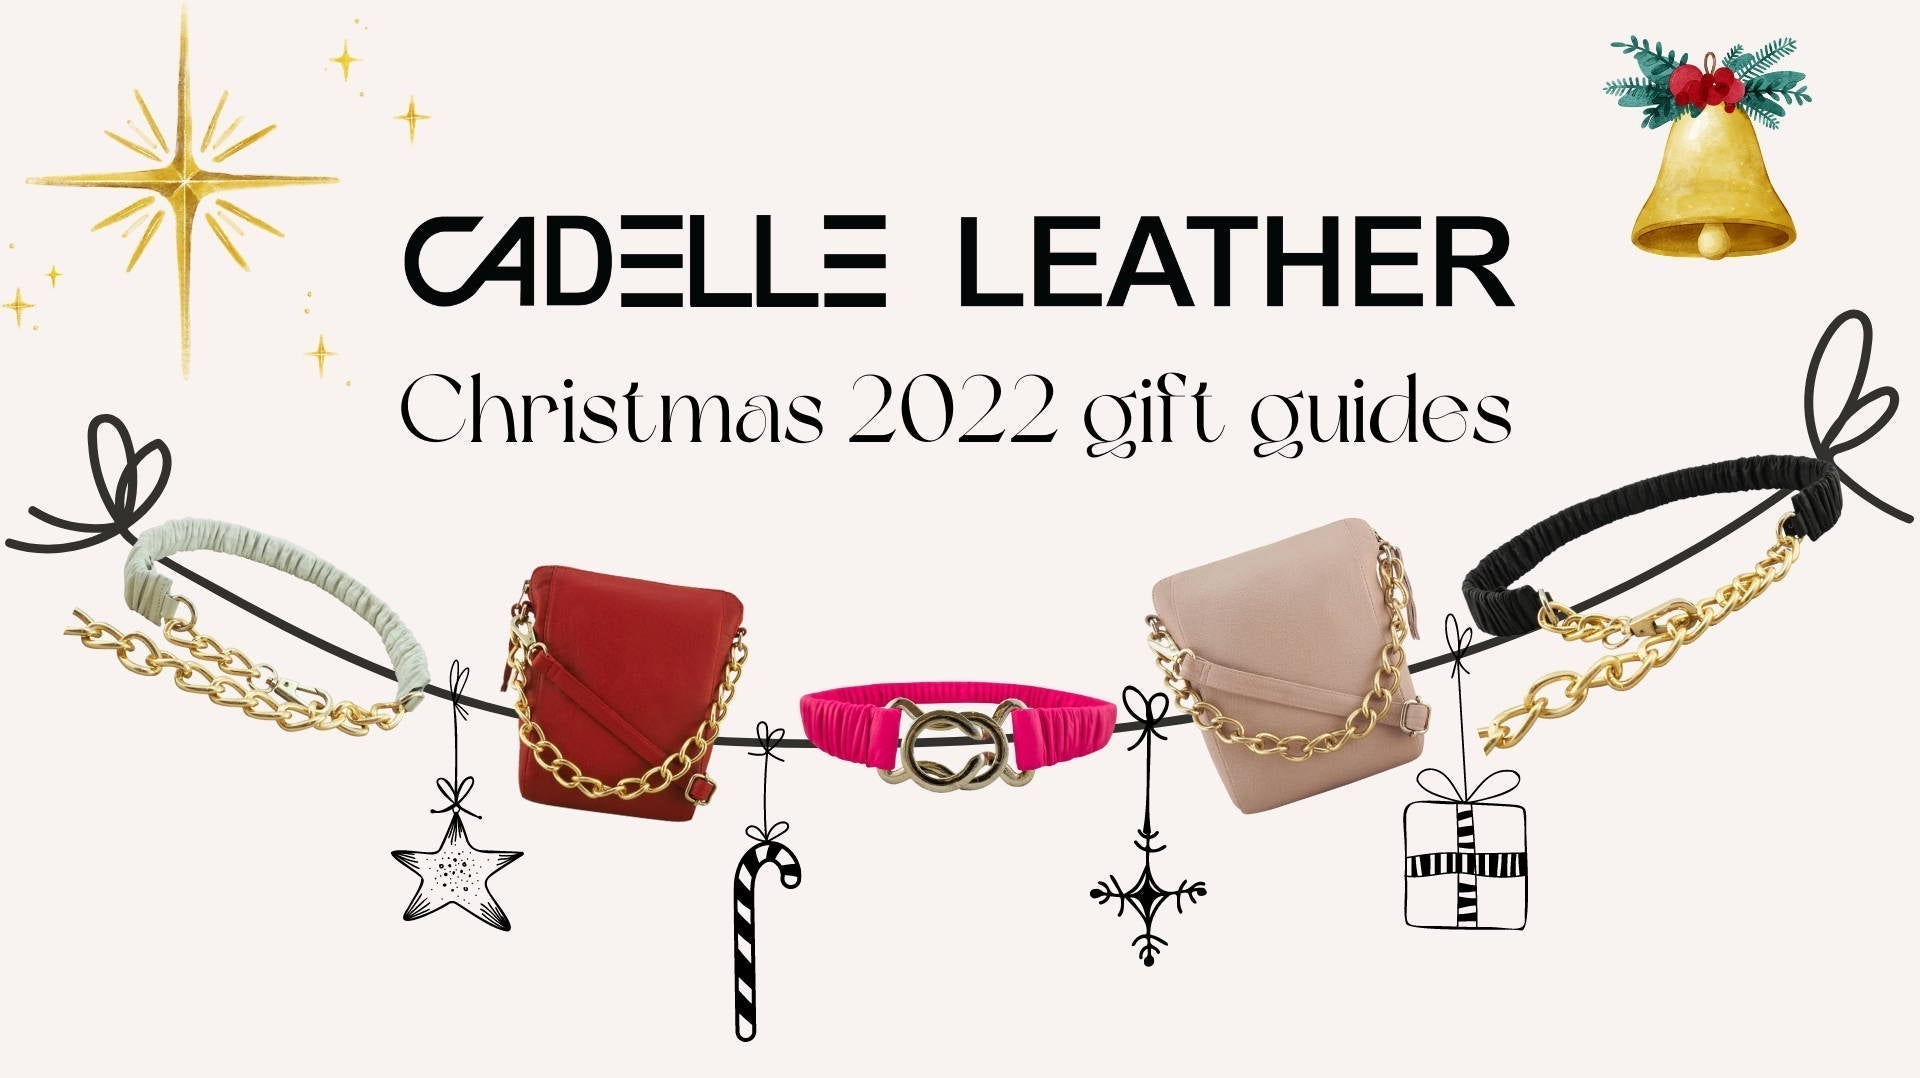 Christmas Gift Guide 2022-CadelleLeather